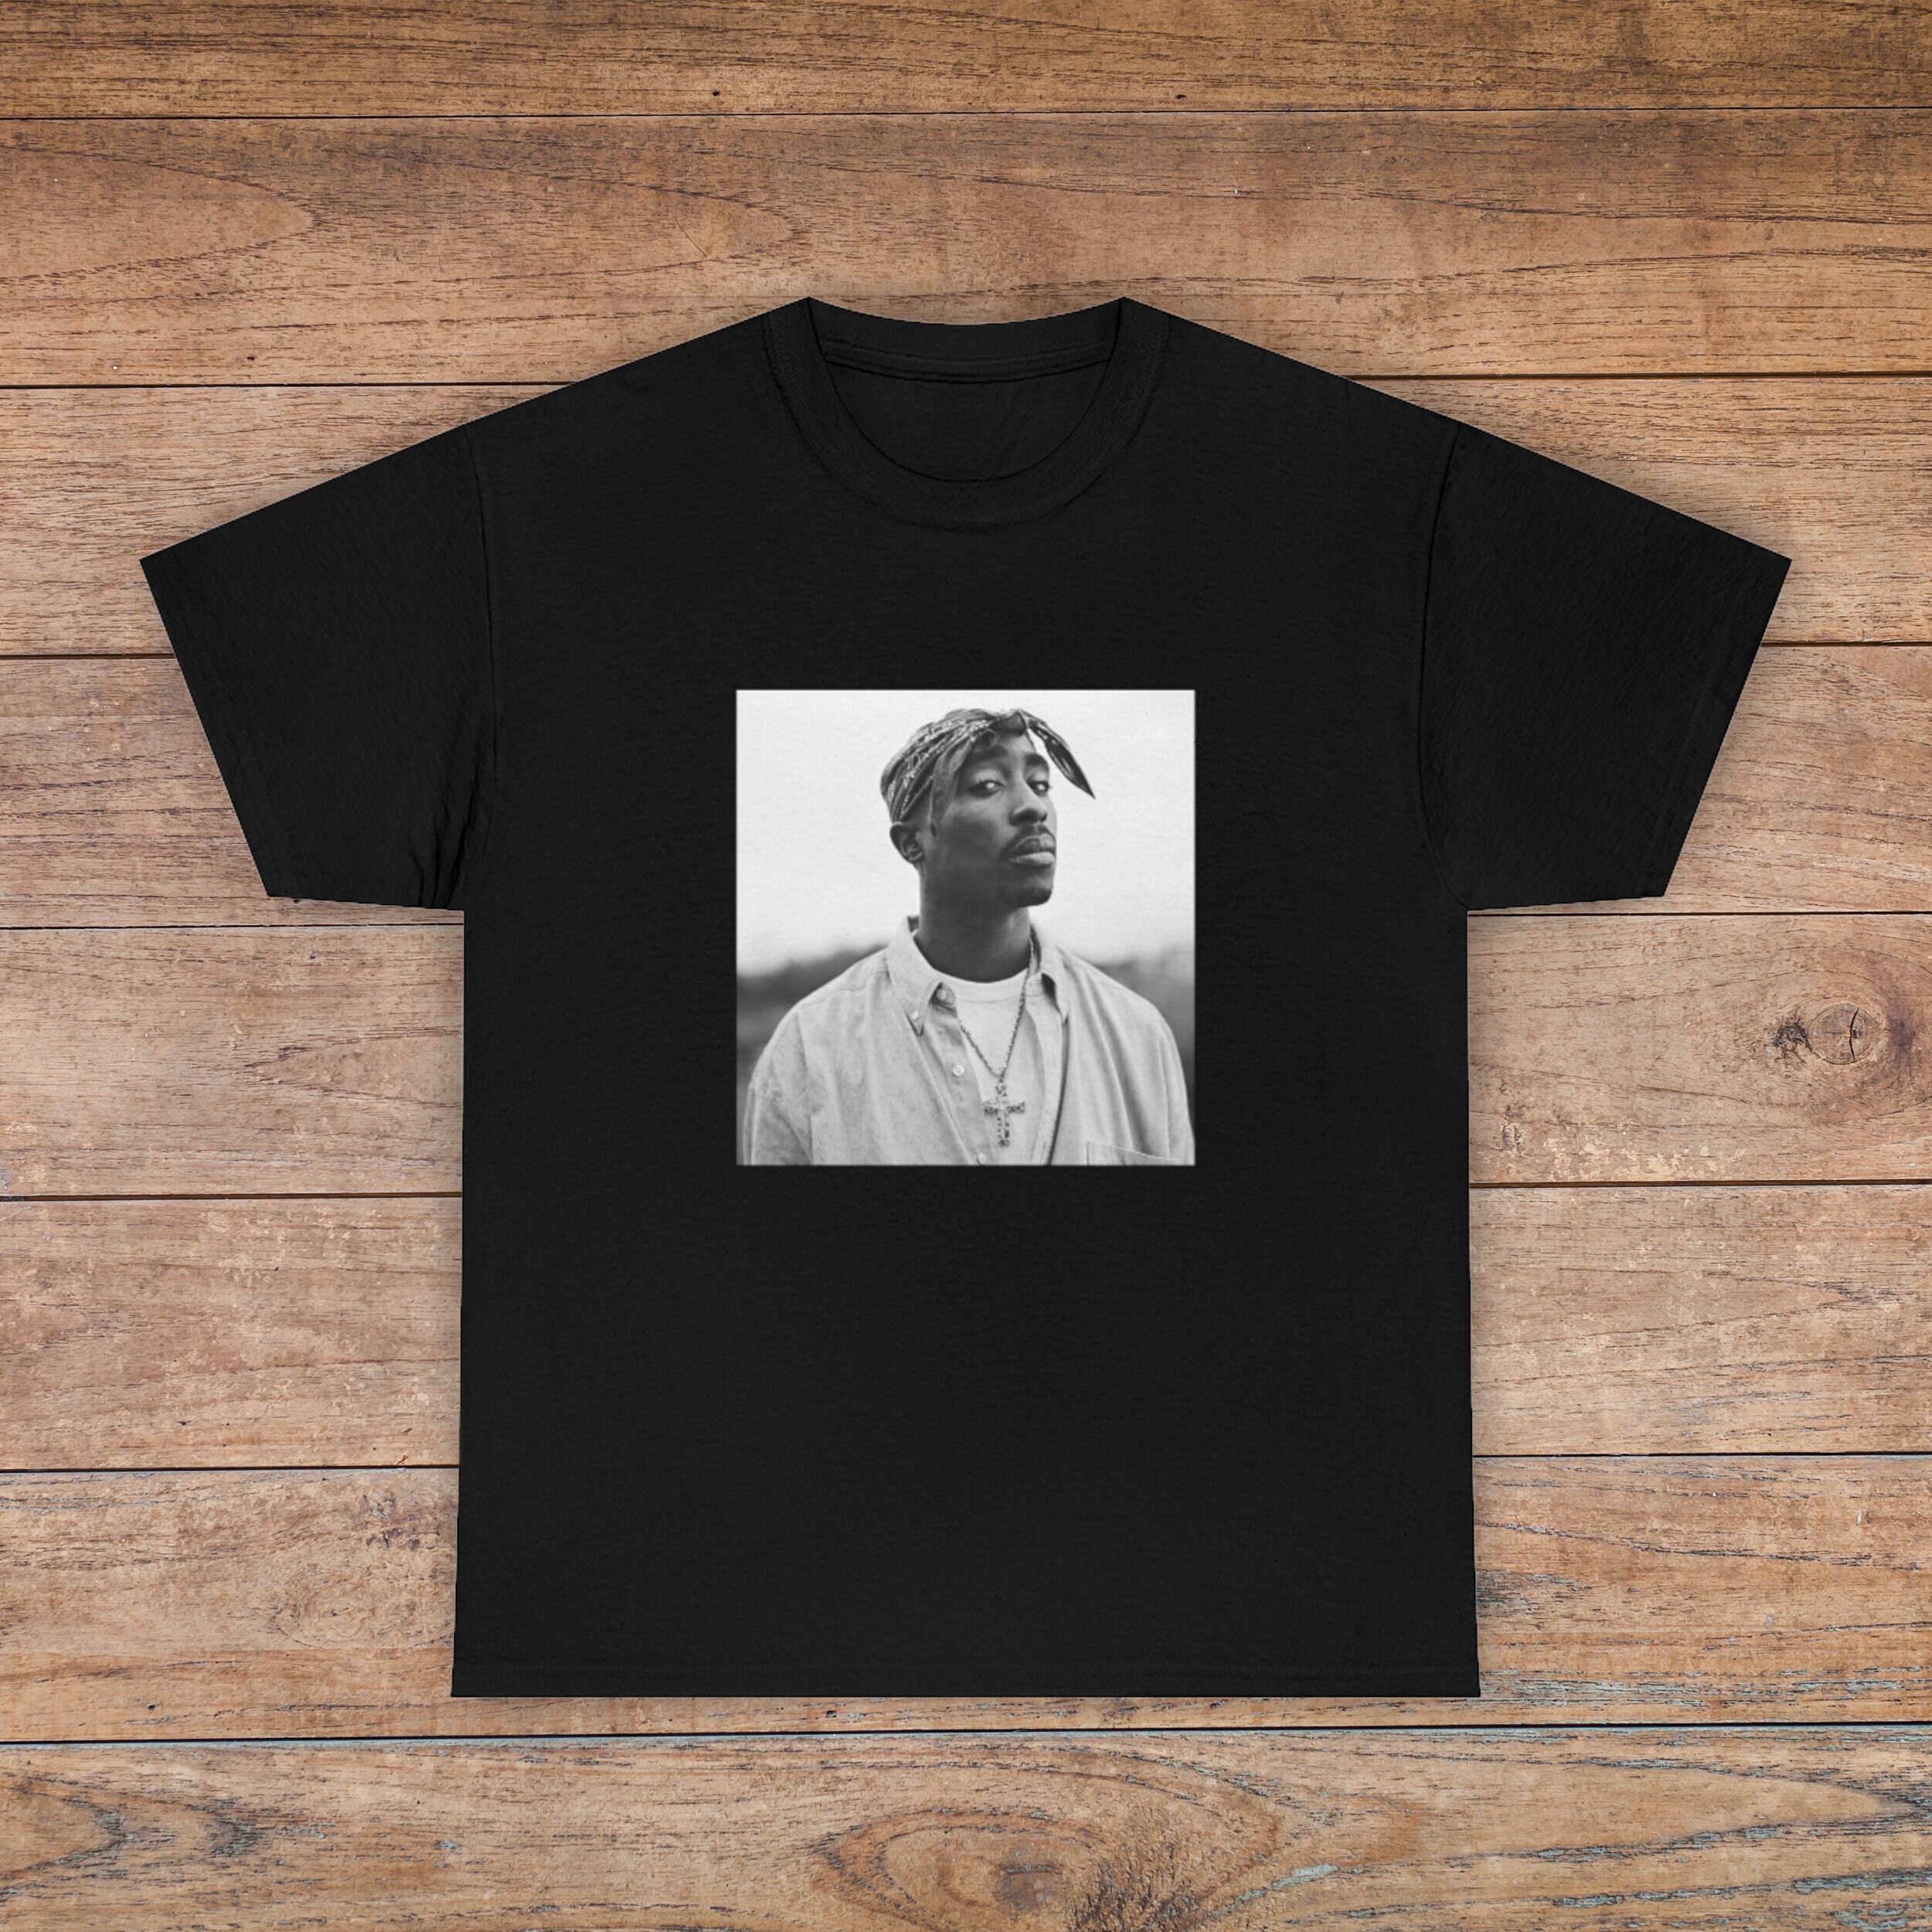 Discover Tupac Shakur T-Shirt, 2pac Tee, Old School Hip Hop Clothing, Rapper Gift, Soft Cotton Tee